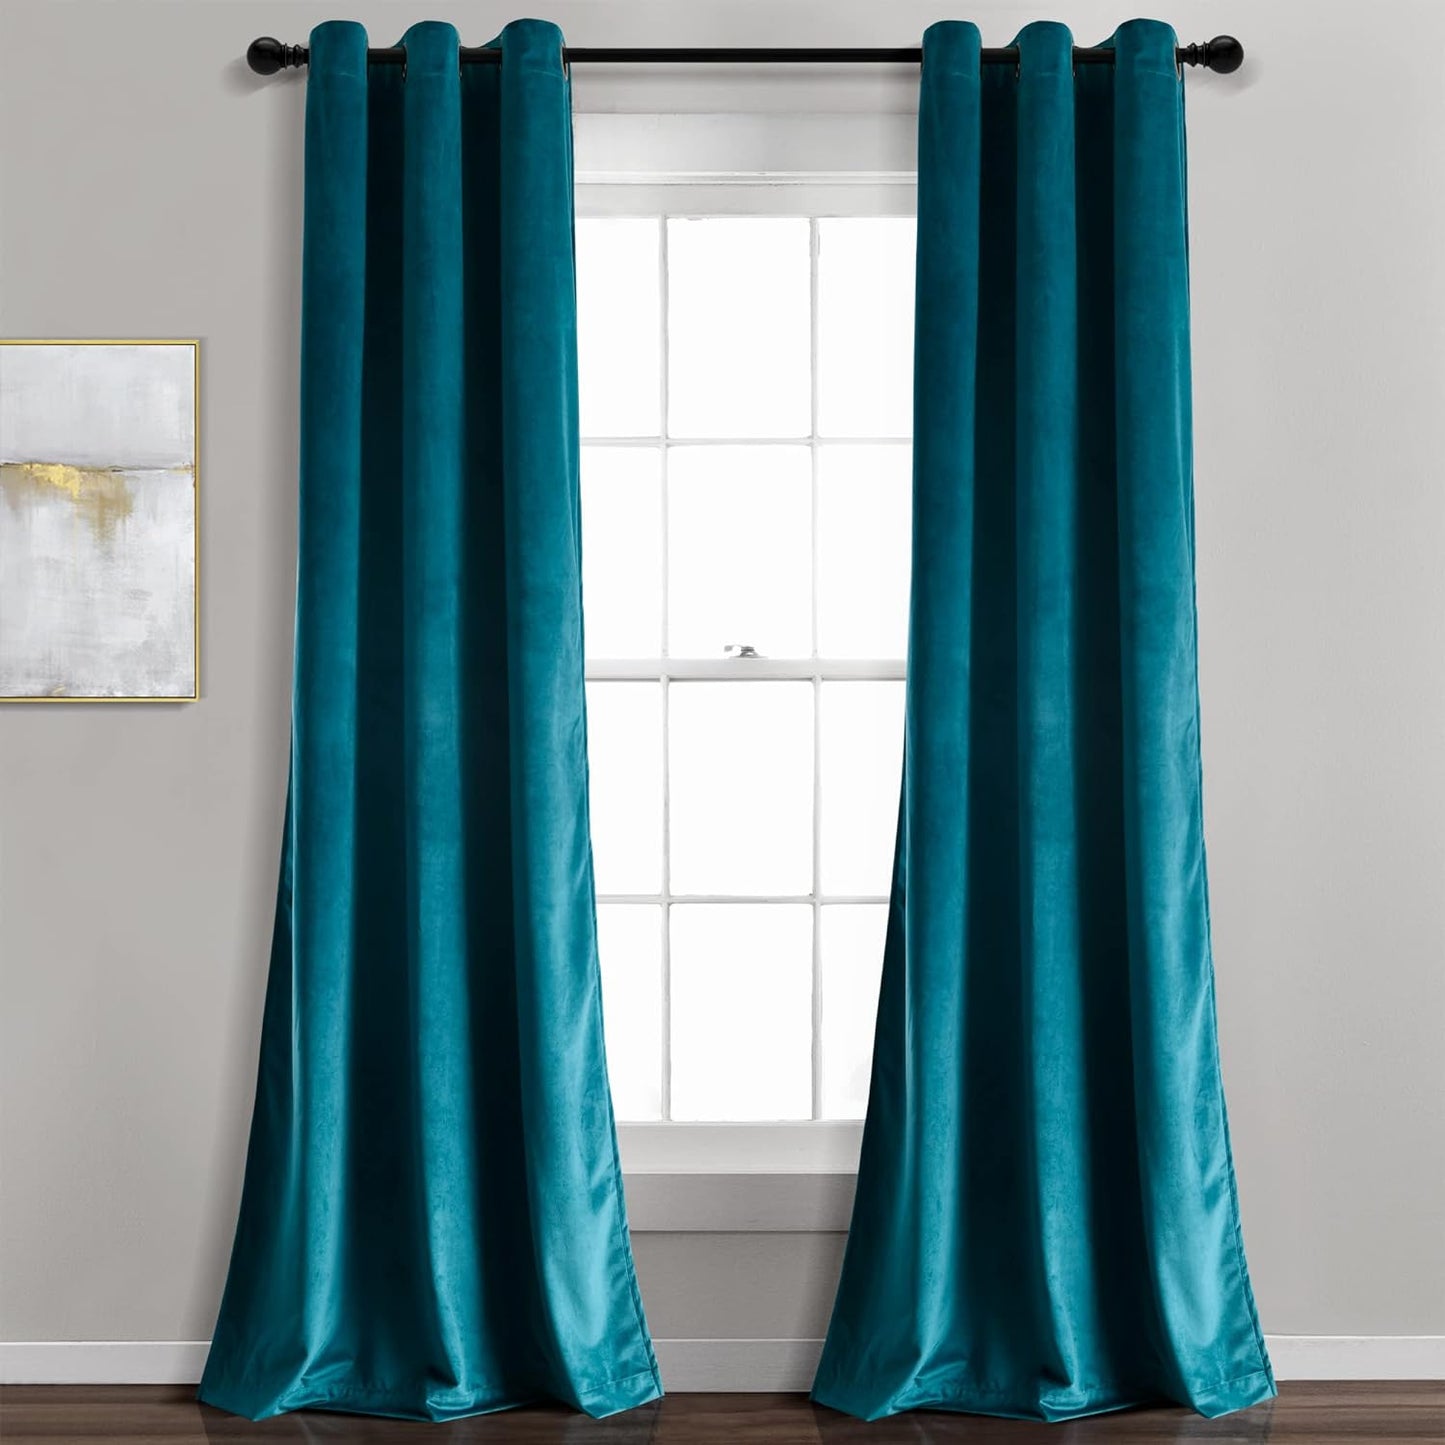 Lush Decor Prima Velvet Curtains Color Block Light Filtering Window Panel Set for Living, Dining, Bedroom (Pair), 38" W X 84" L, Navy  Triangle Home Fashions Peacock Room Darkening 38"W X 95"L